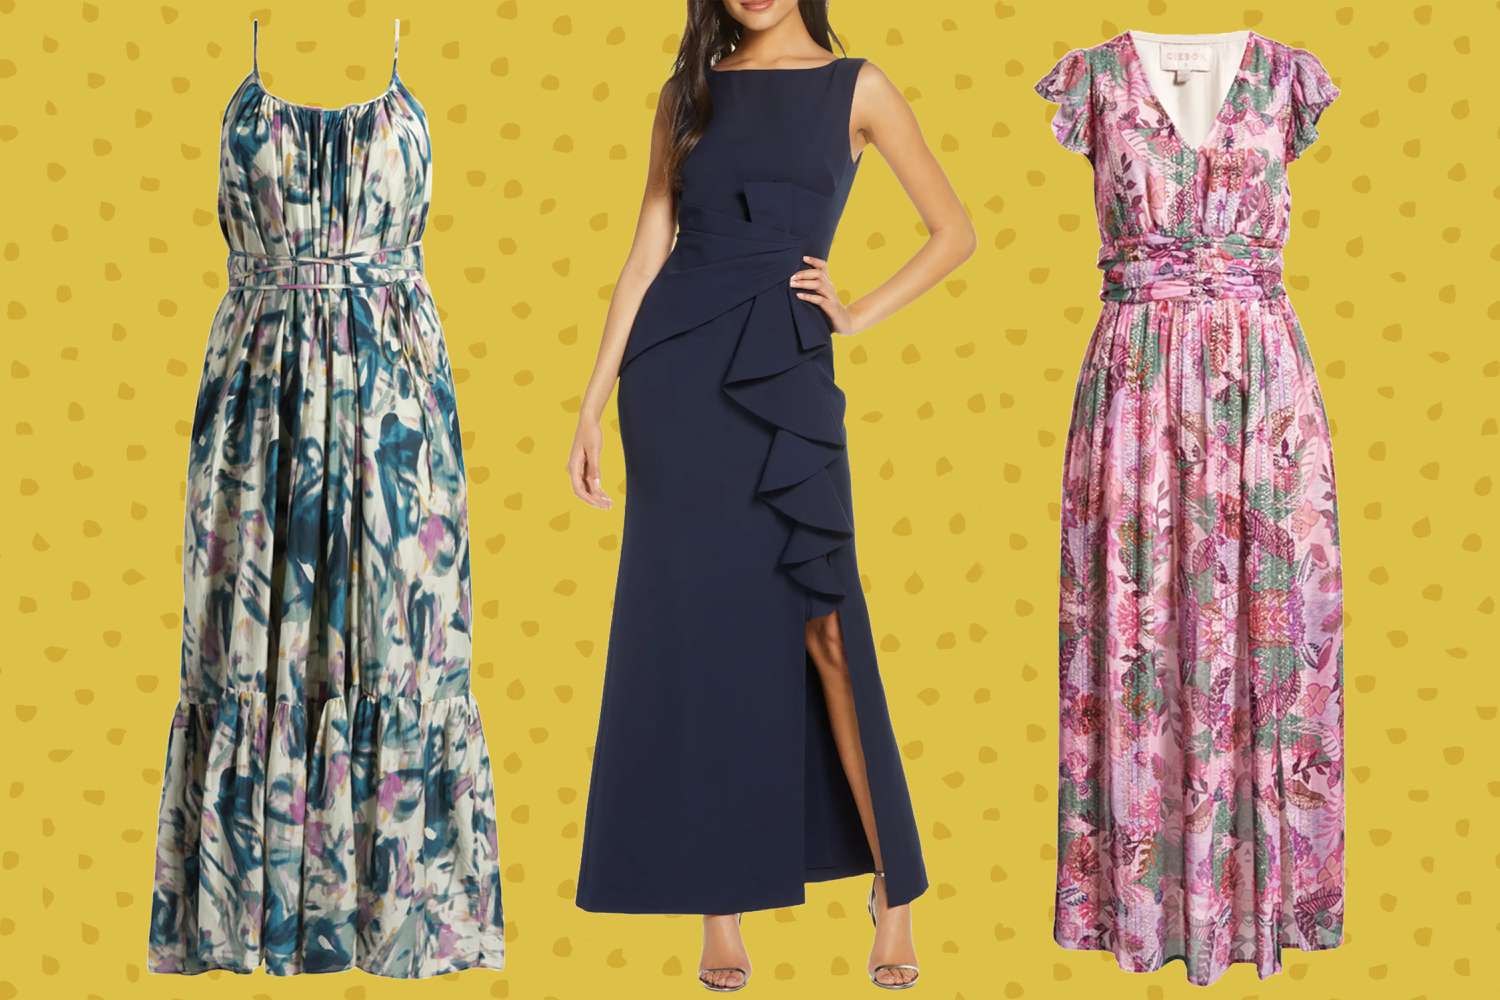 Take It From A Wedding Planner: Shop Nordstrom’s 10 Best Summer Wedding Guest Dresses